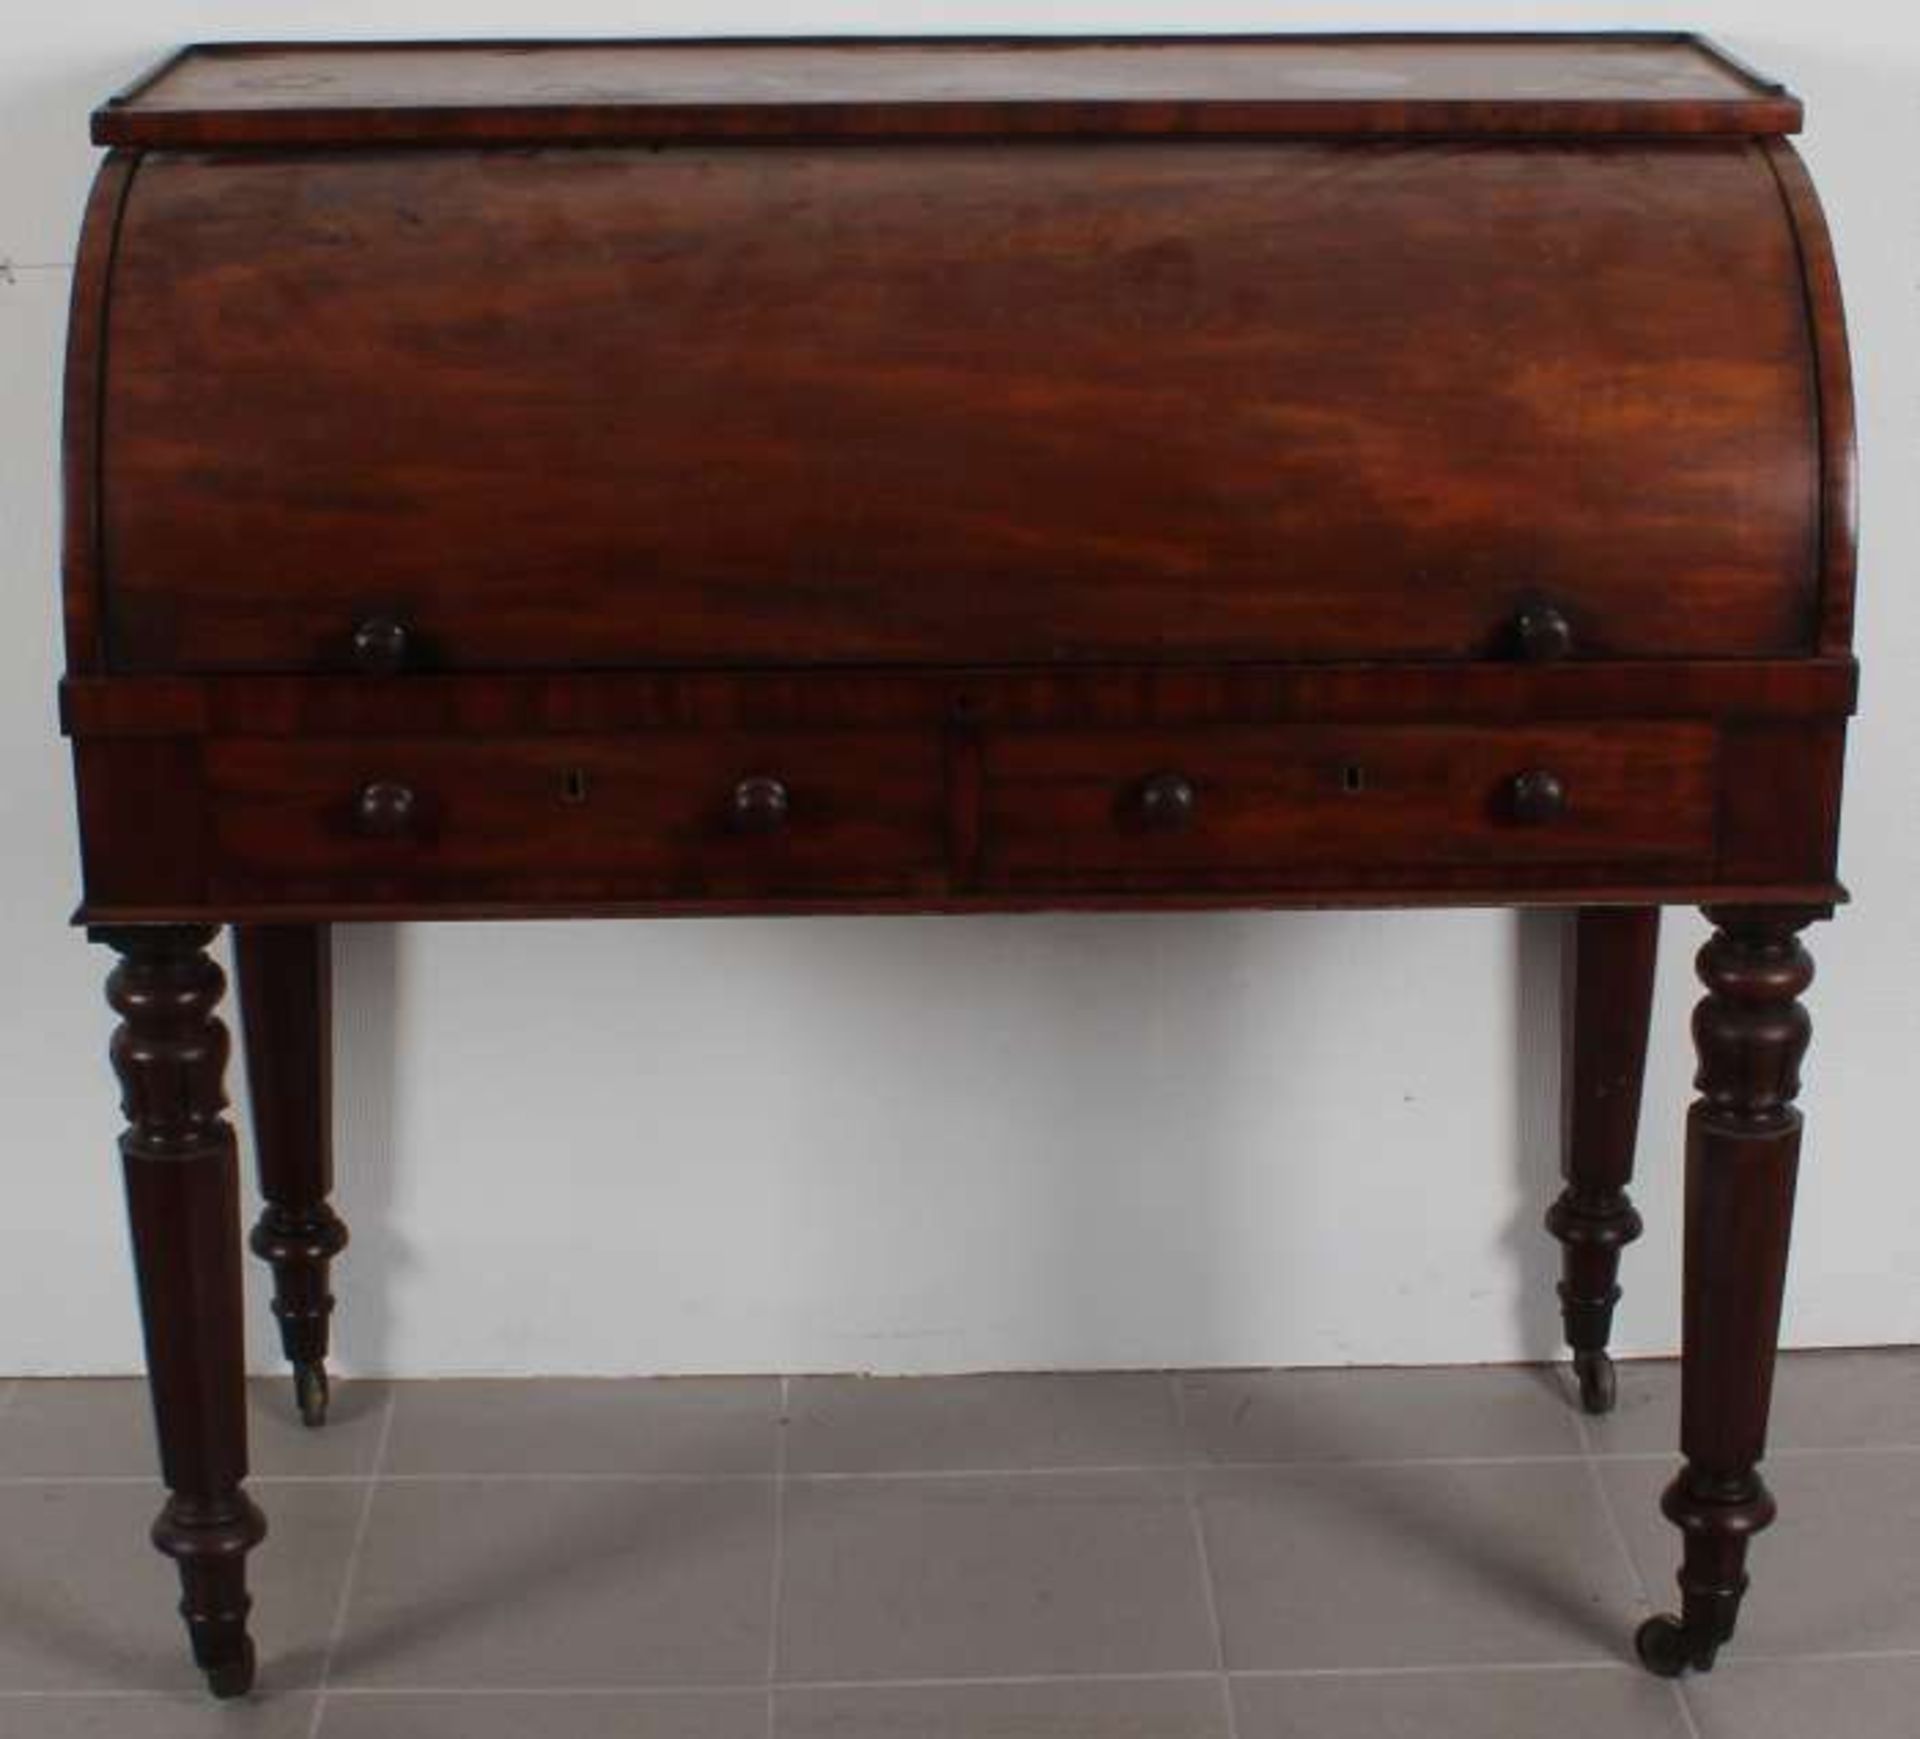 English mahogany veneer rolbureau with 6 drawers, roll and fold away writing tablet 1860 in very